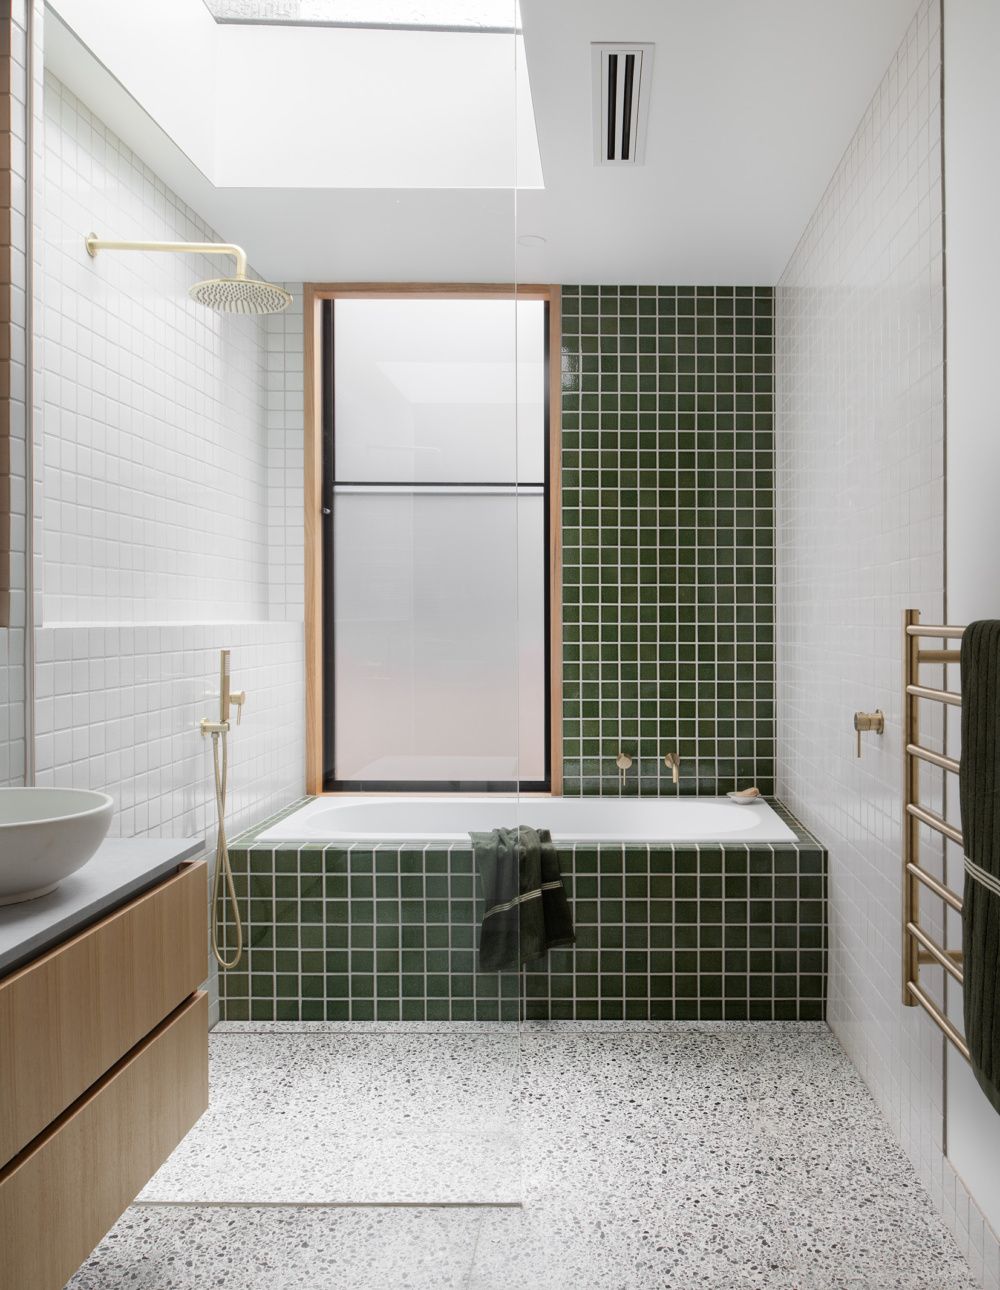 Bathroom Renovation  Ideas That Will
  Inspire You